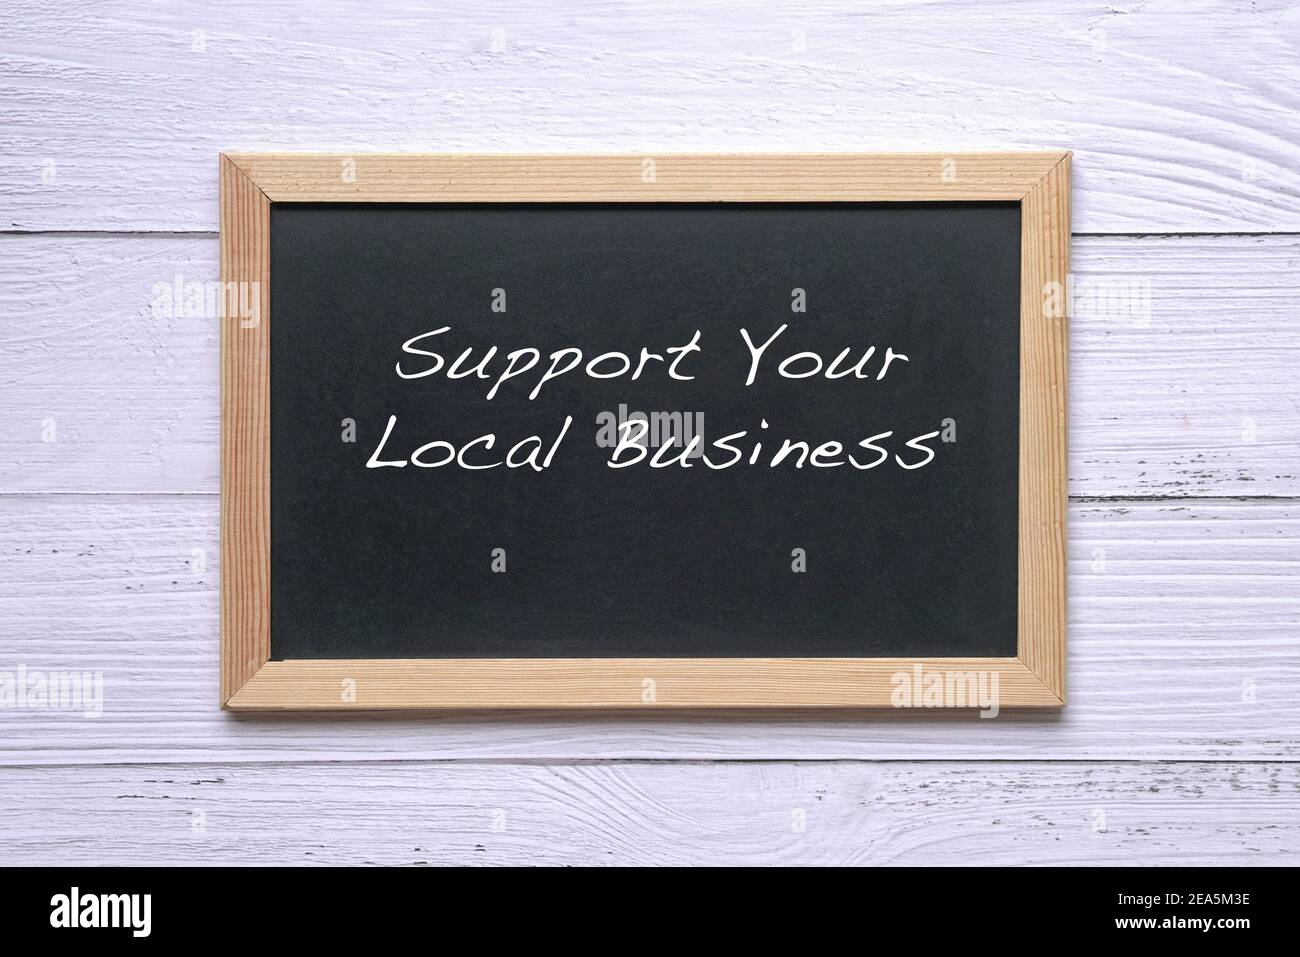 Support Your Local Business, words written on blackboard. Reminder to support and buy goods and services in your community. Stock Photo